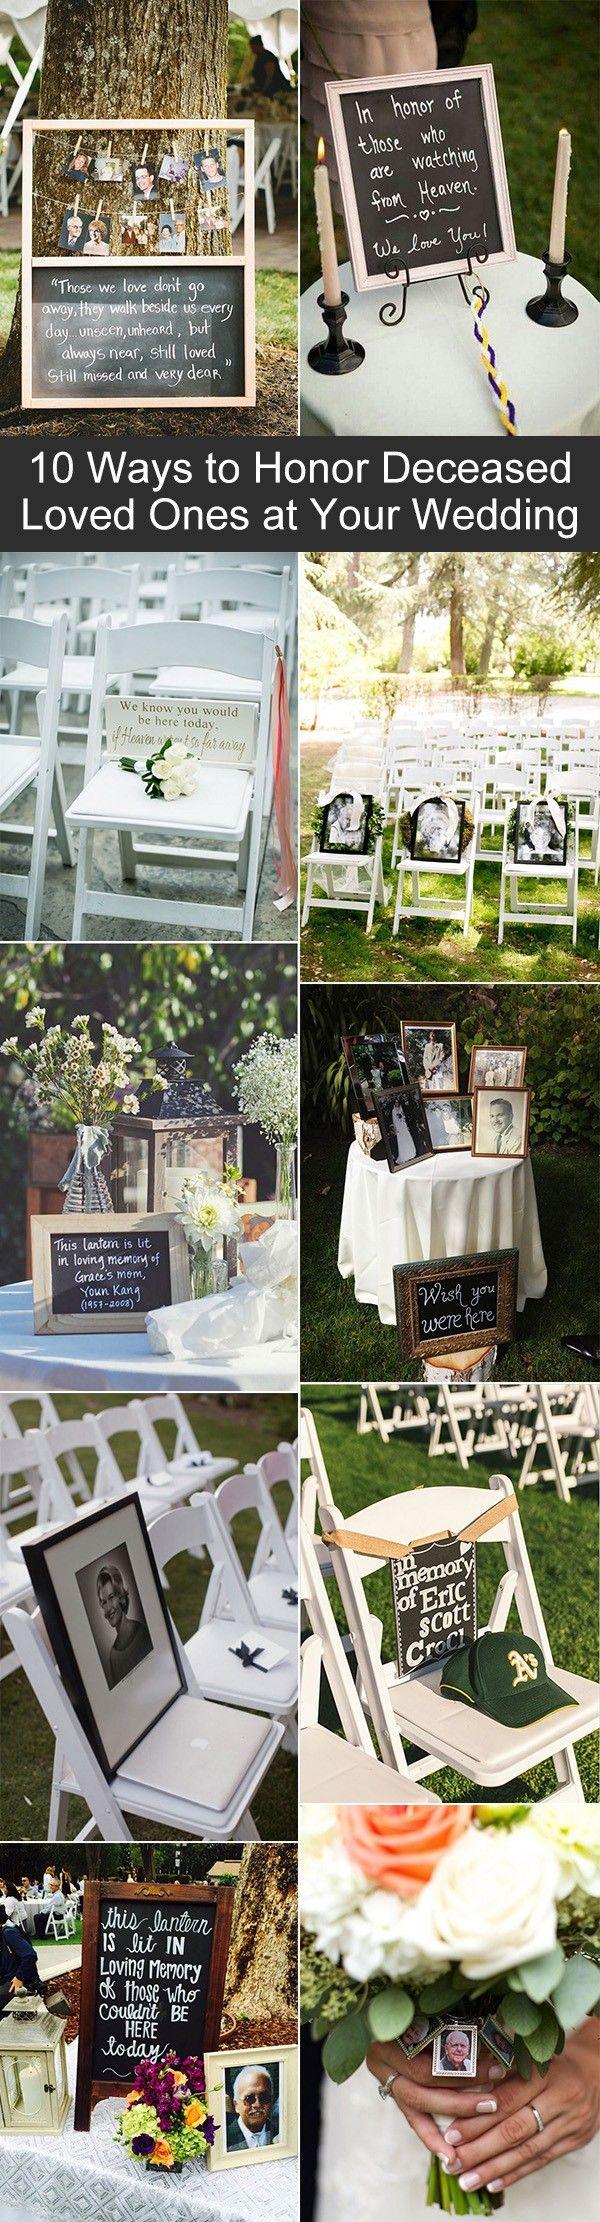 Mariage - 10 Unique Ways To Honor Deceased Loved Ones At Your Wedding